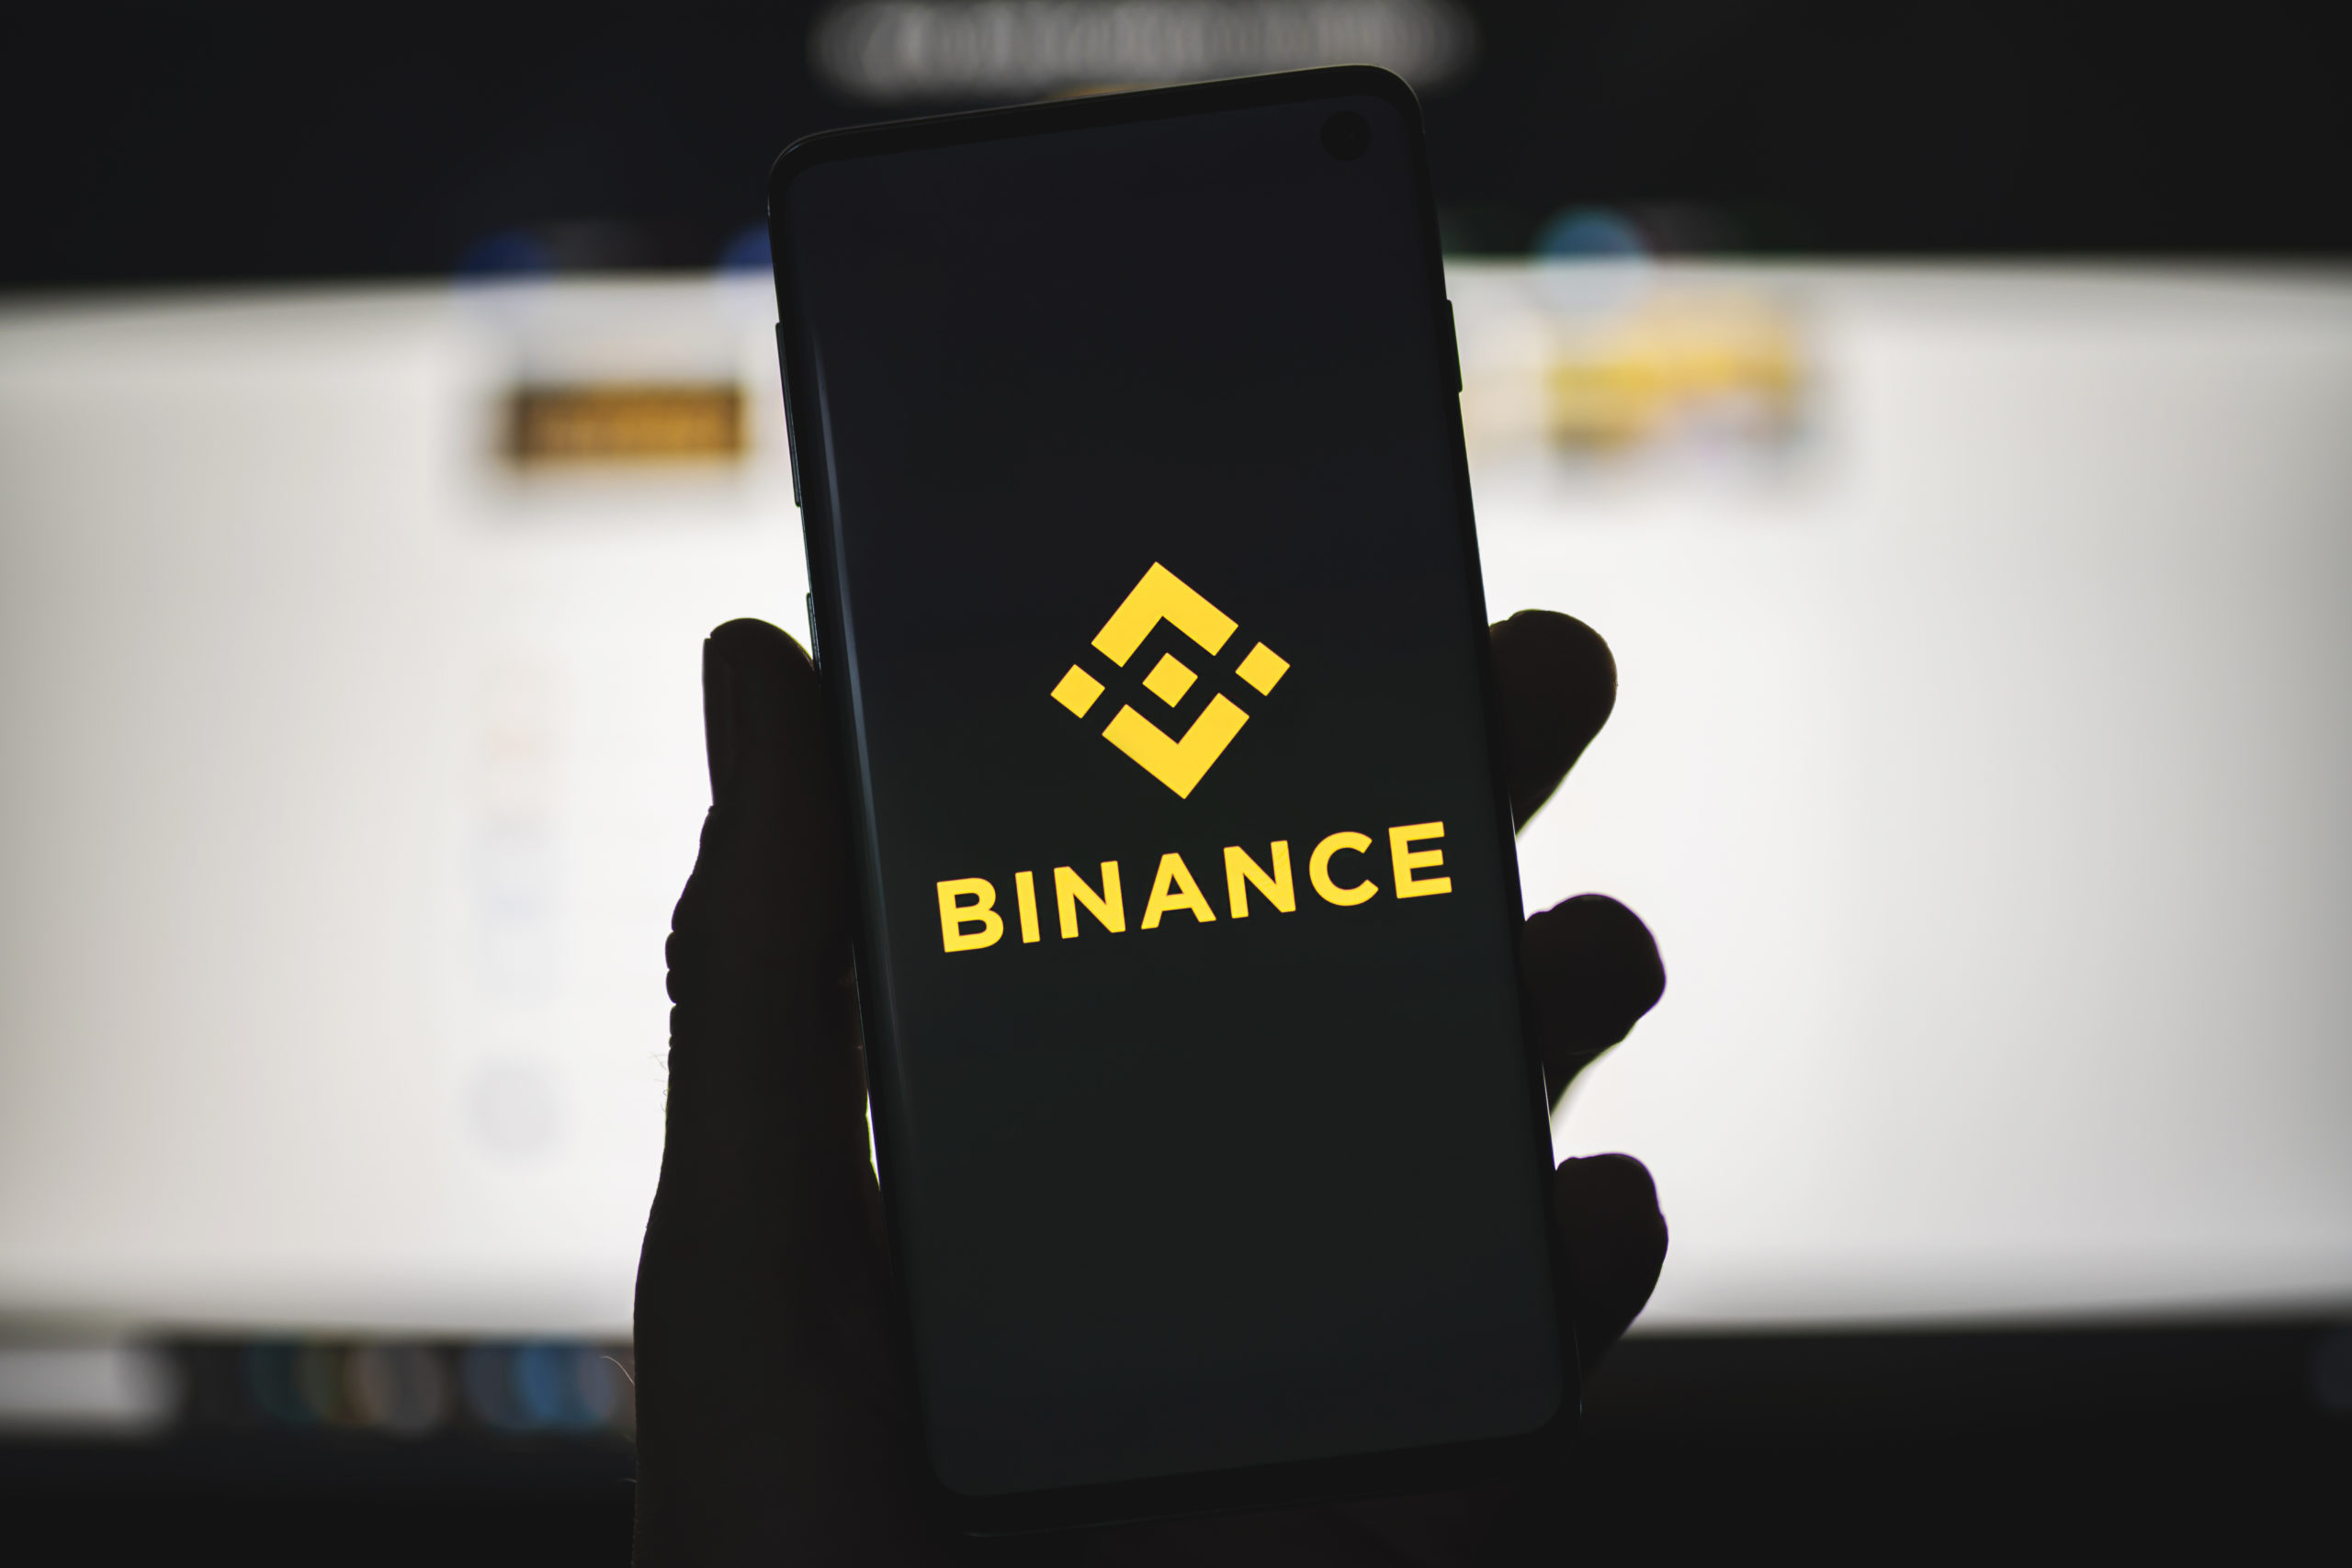 US Authorities Close In: Binance Expected to Pay Penalties for Regulatory Probes